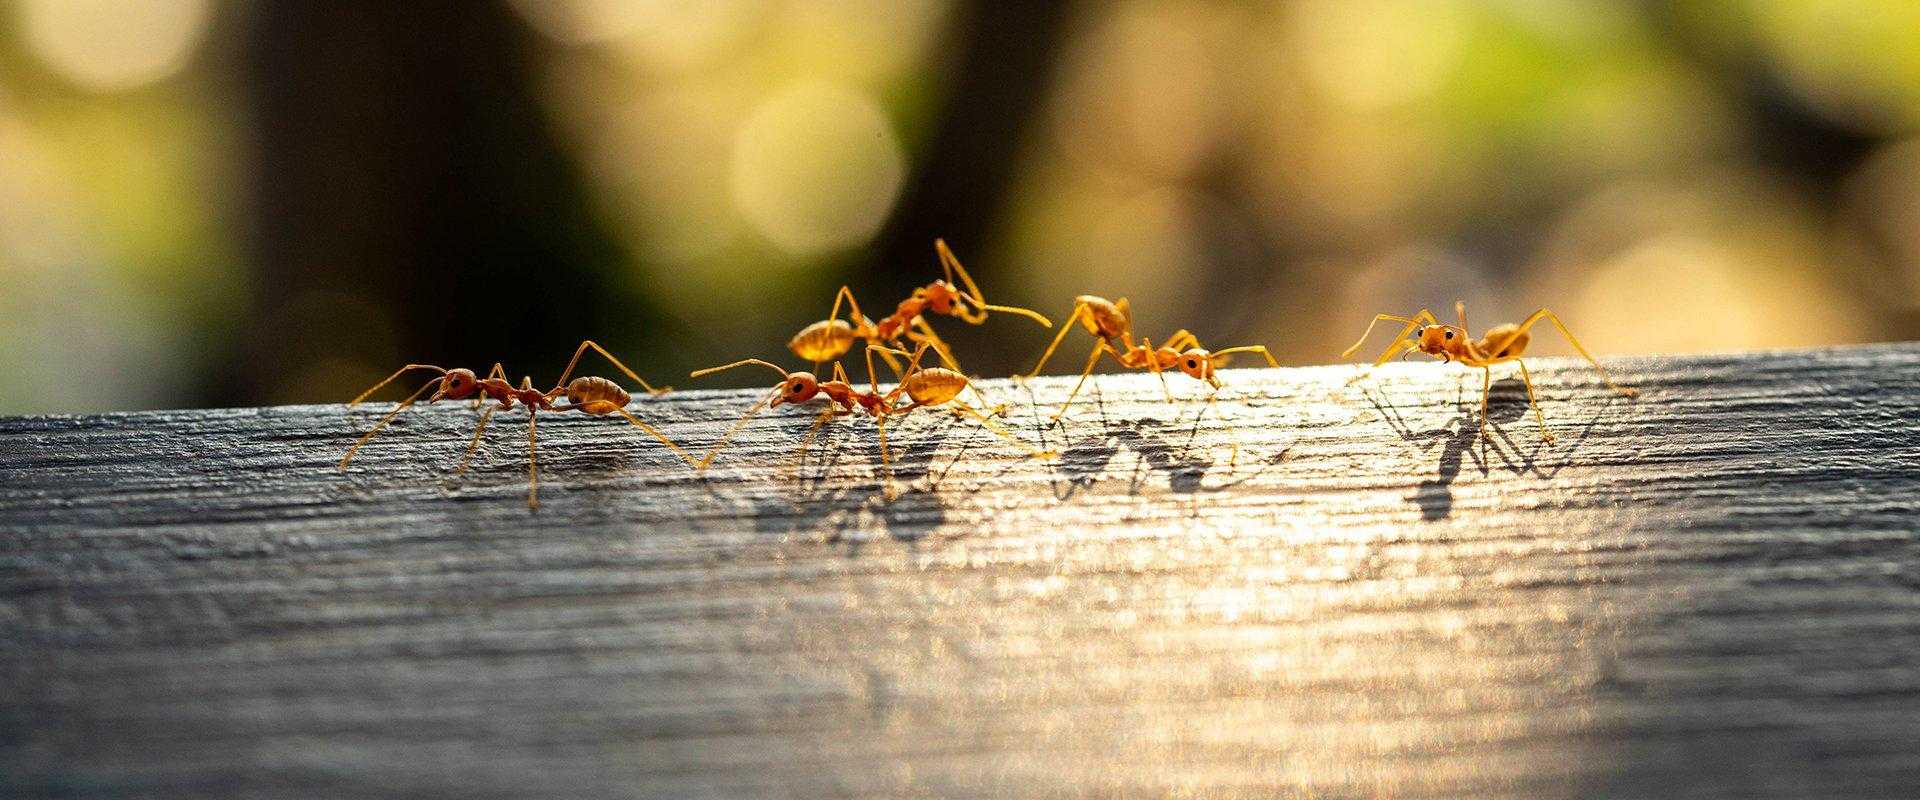 fire ants crawling on ground in south florida